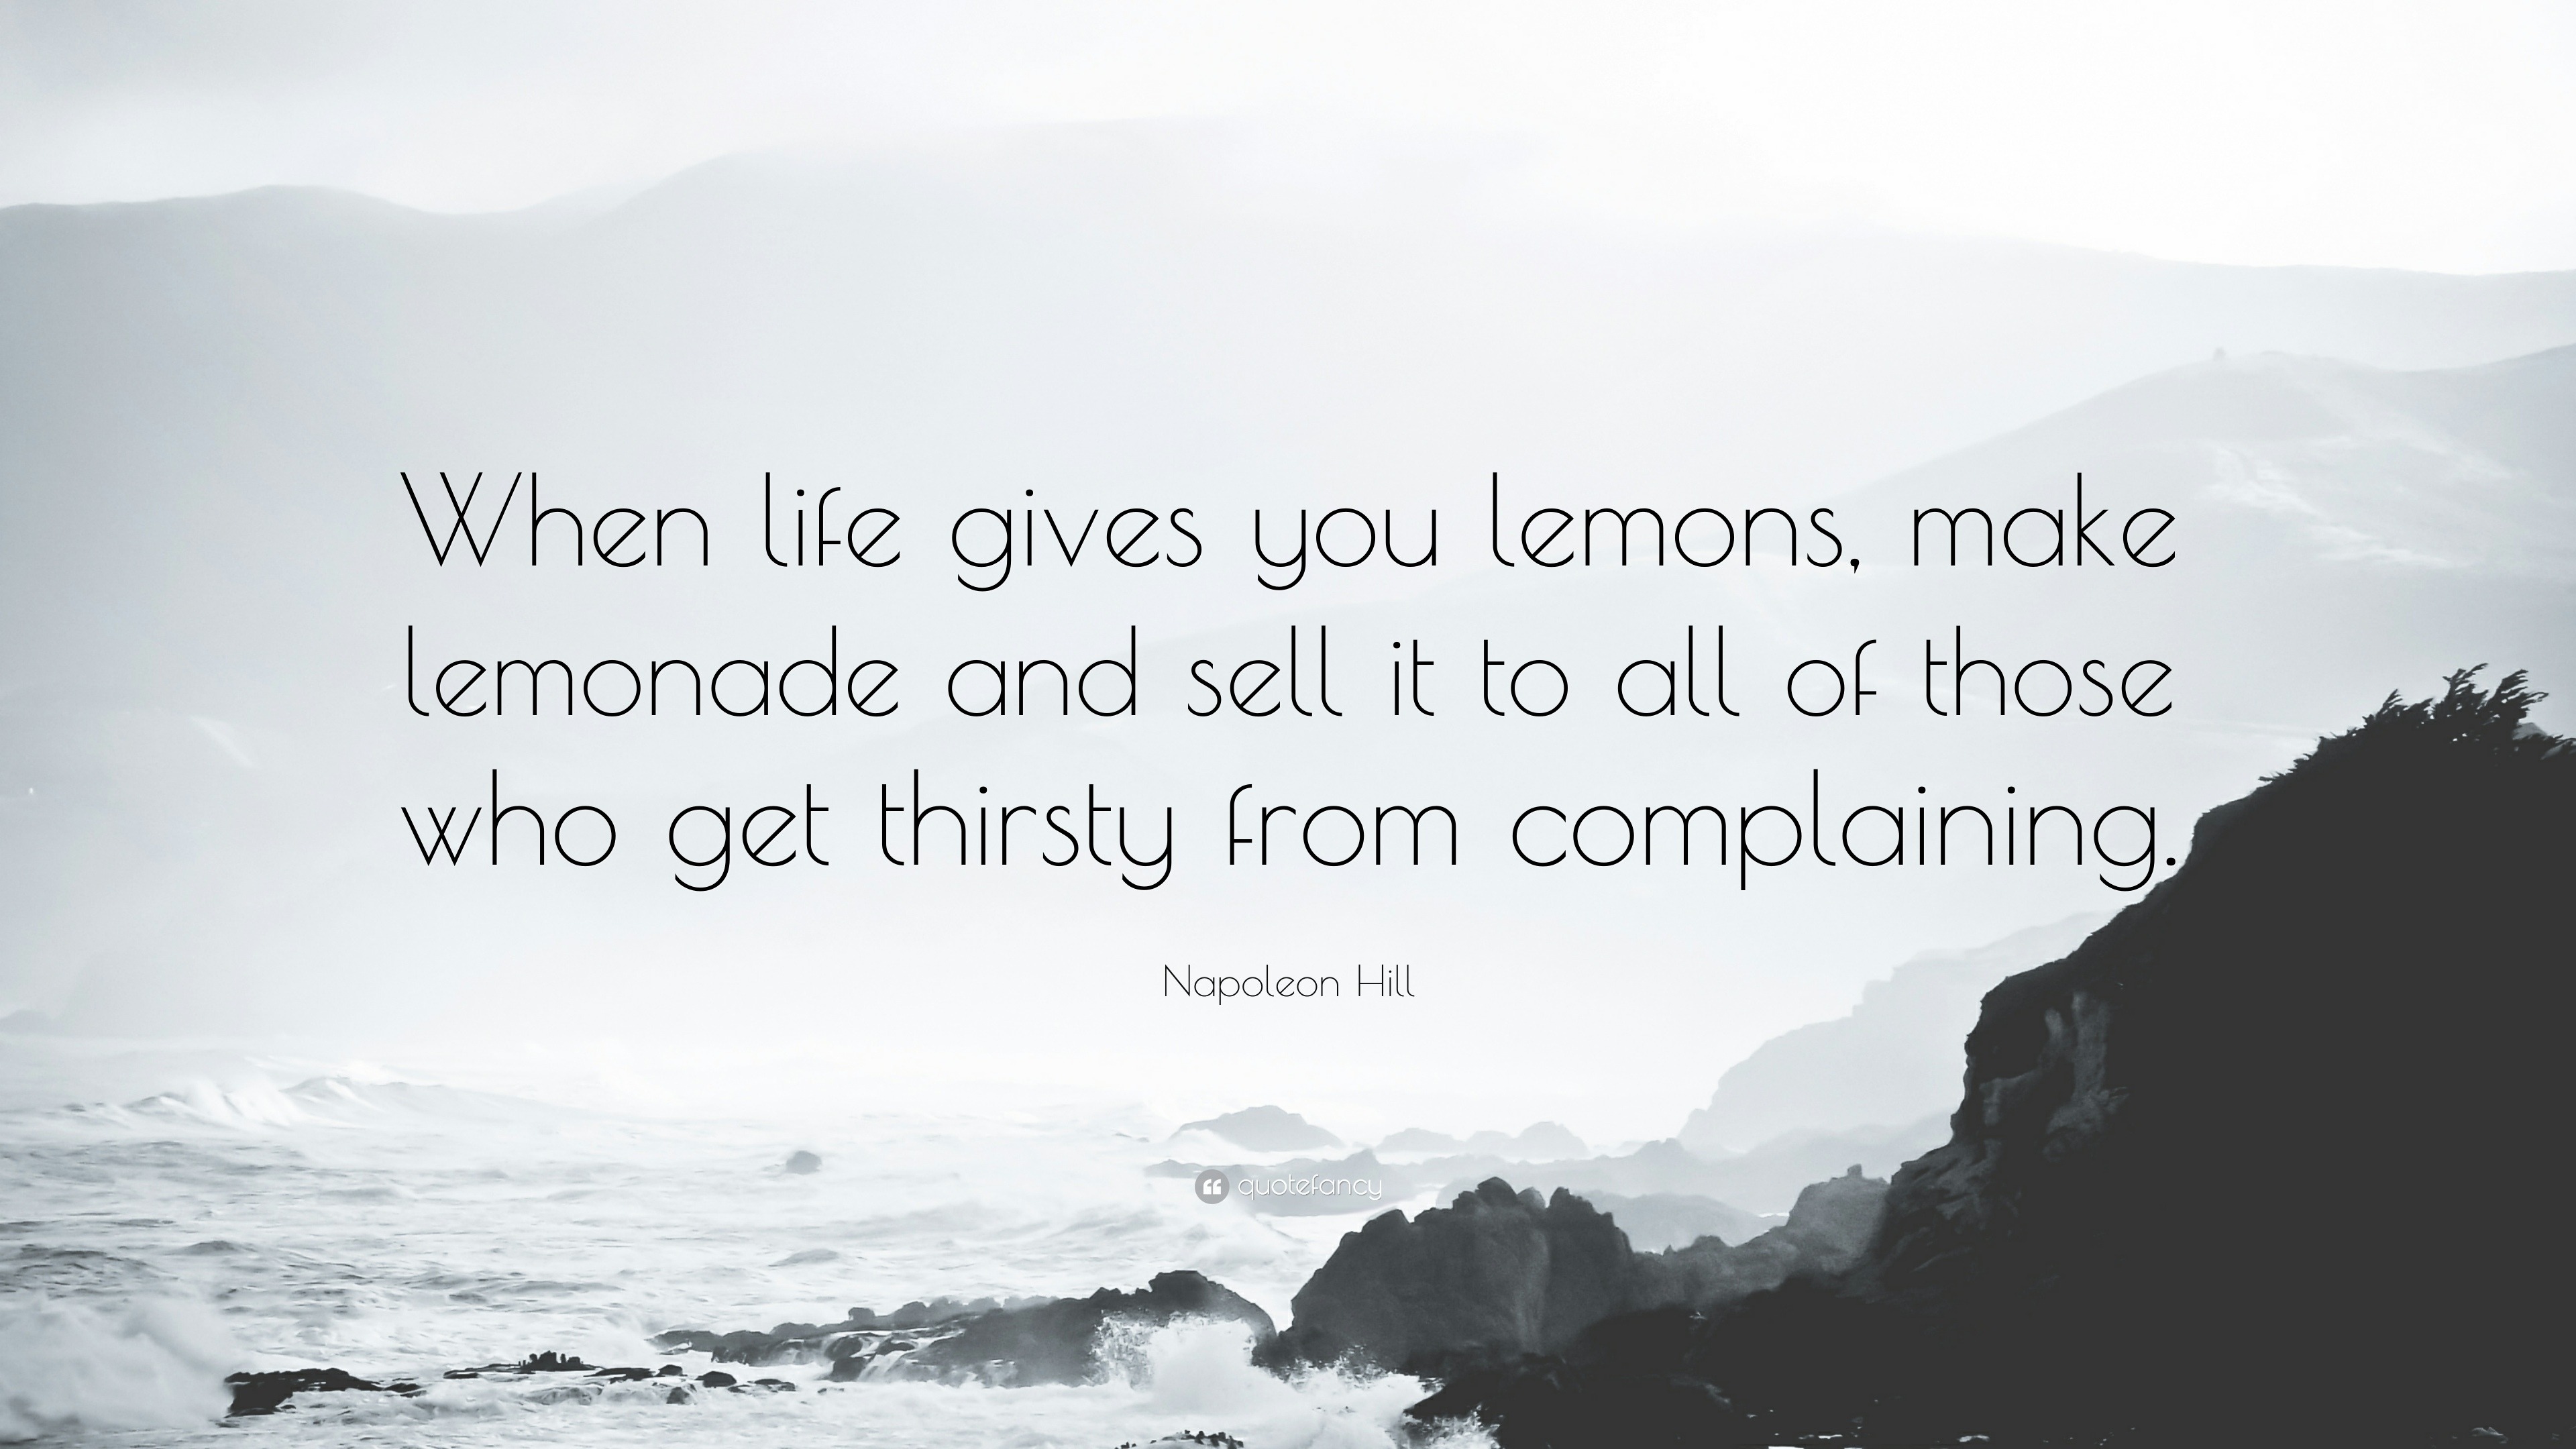 plaining Quotes “When life gives you lemons make lemonade and sell it to